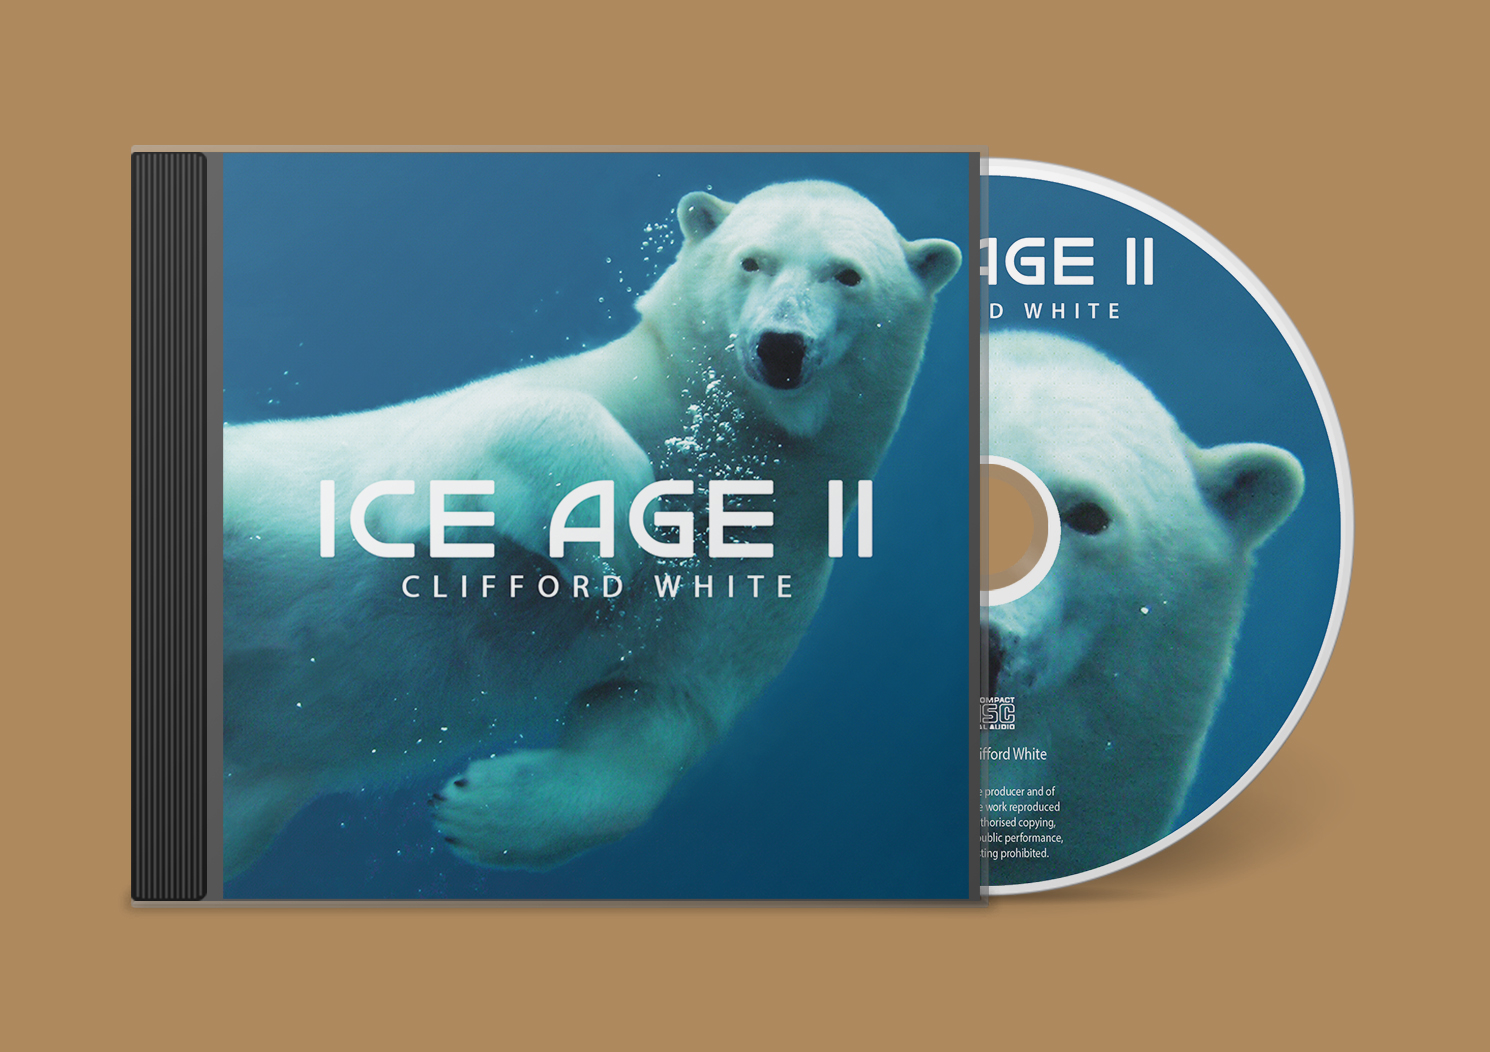 Ice Age 2 by Clifford White